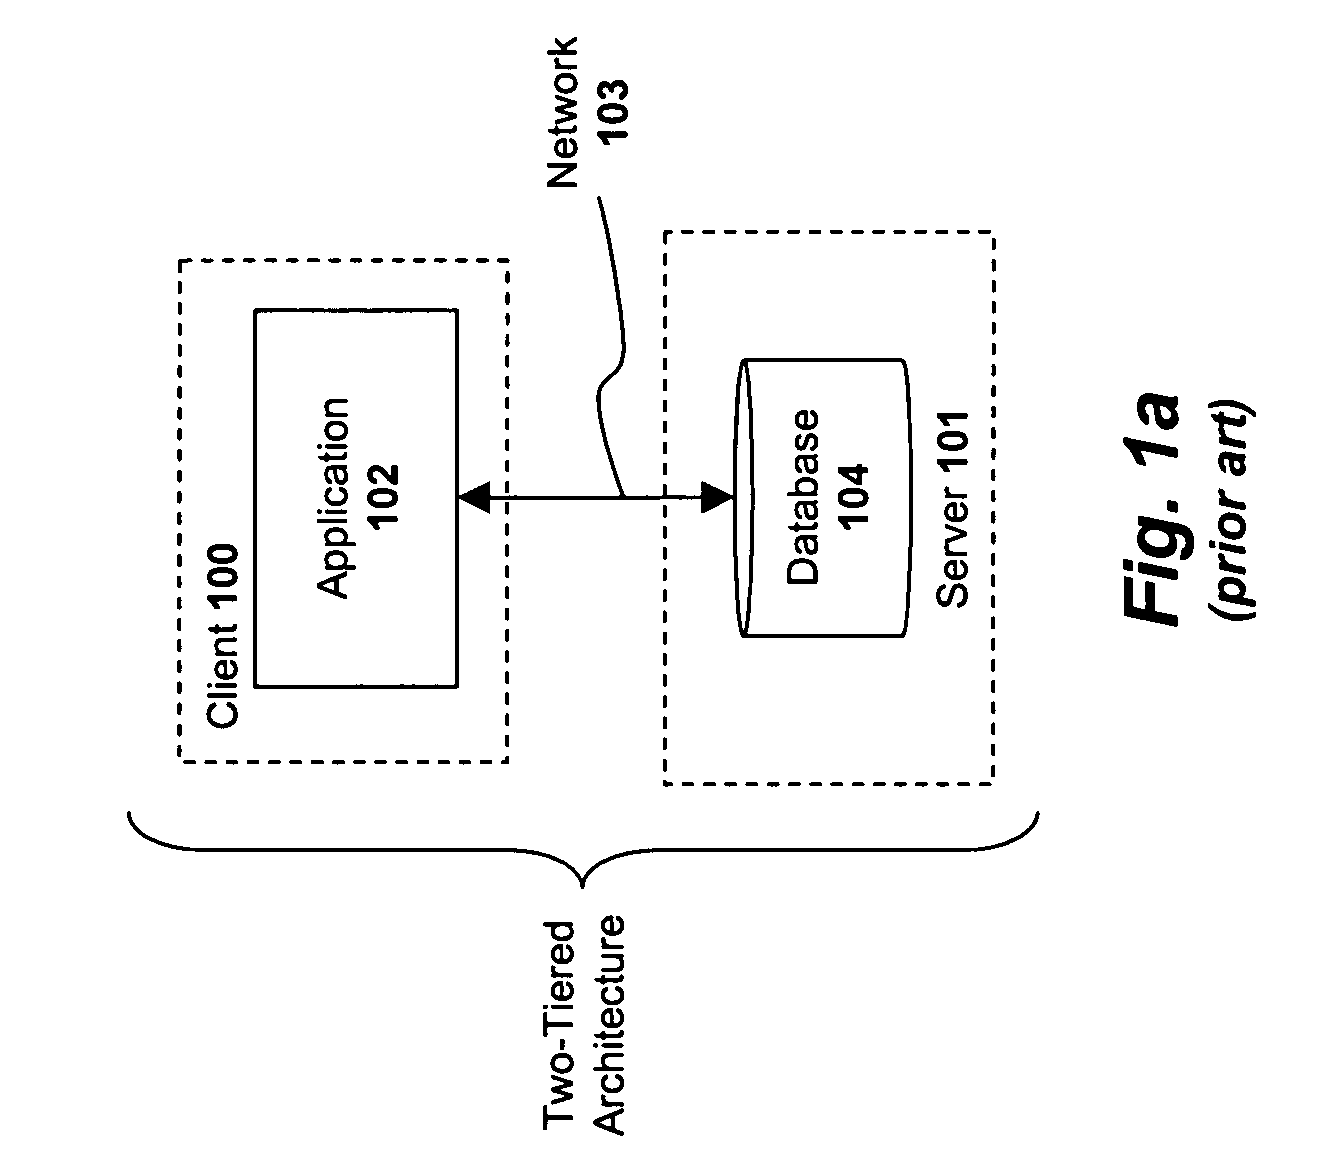 System and method for testing applications at the business layer